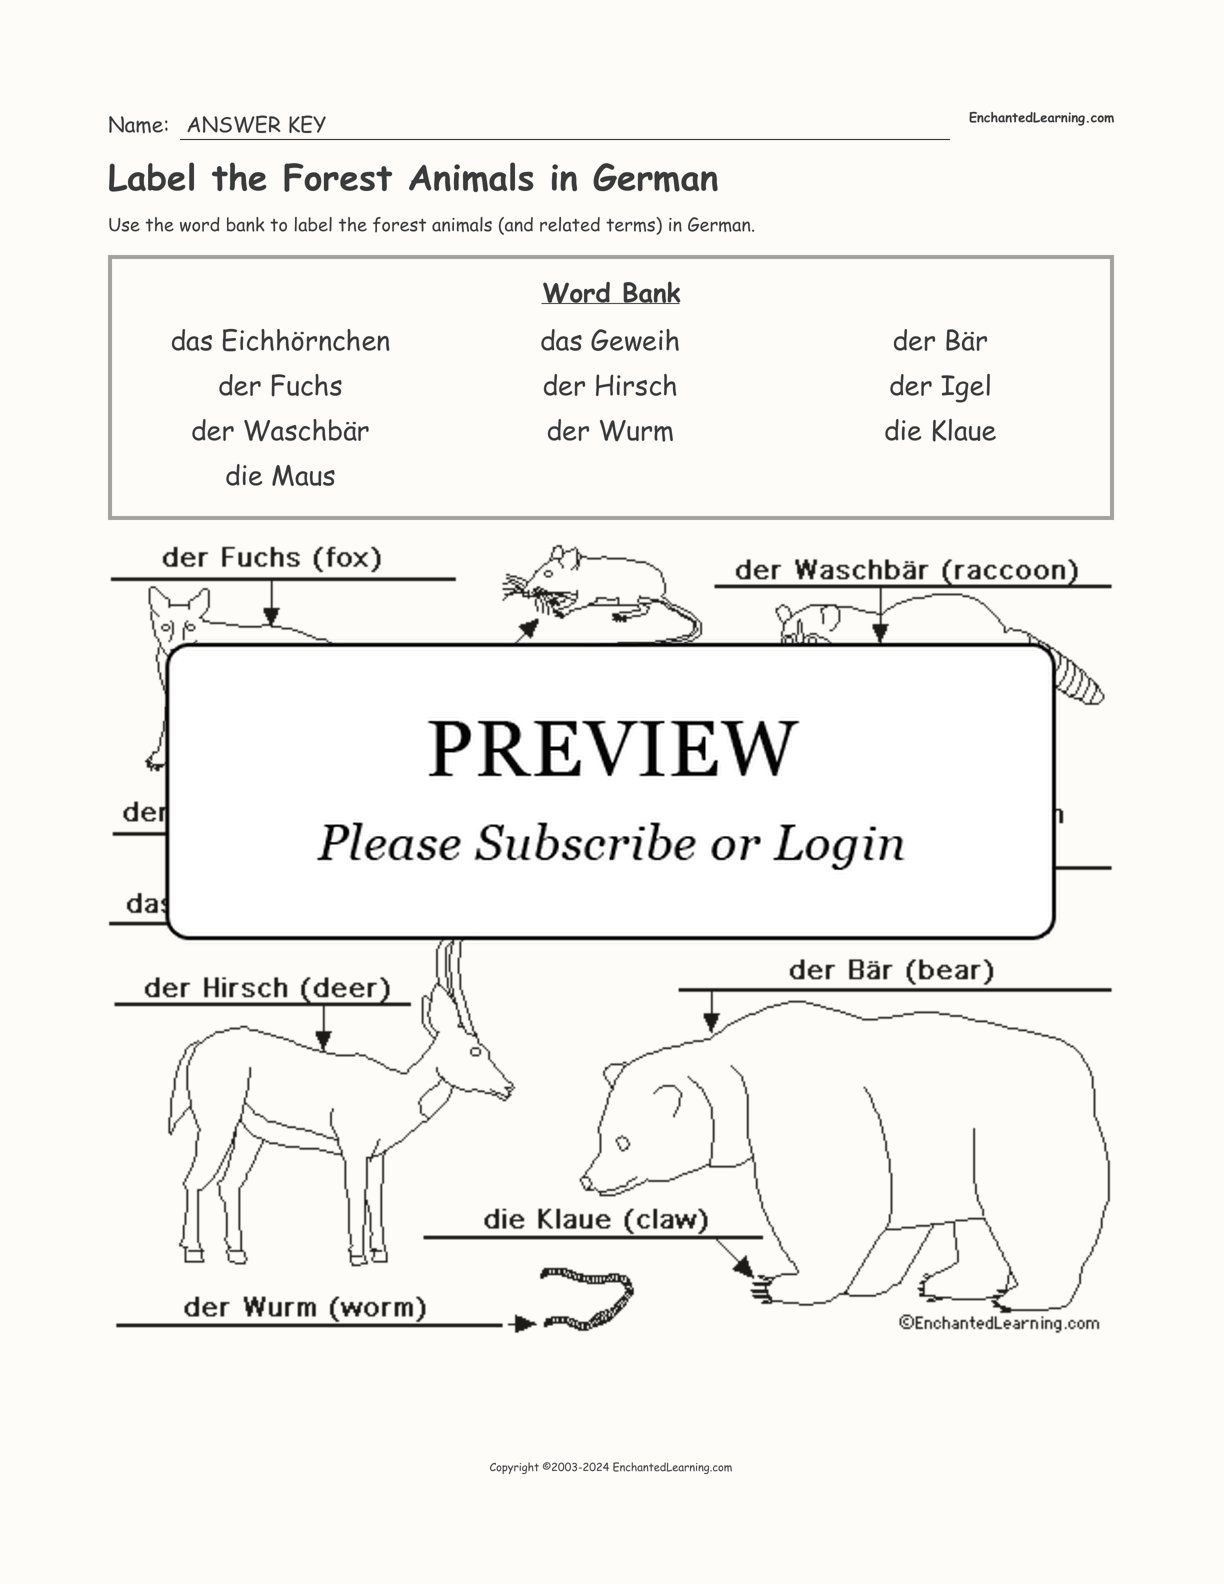 Label the Forest Animals in German interactive worksheet page 2